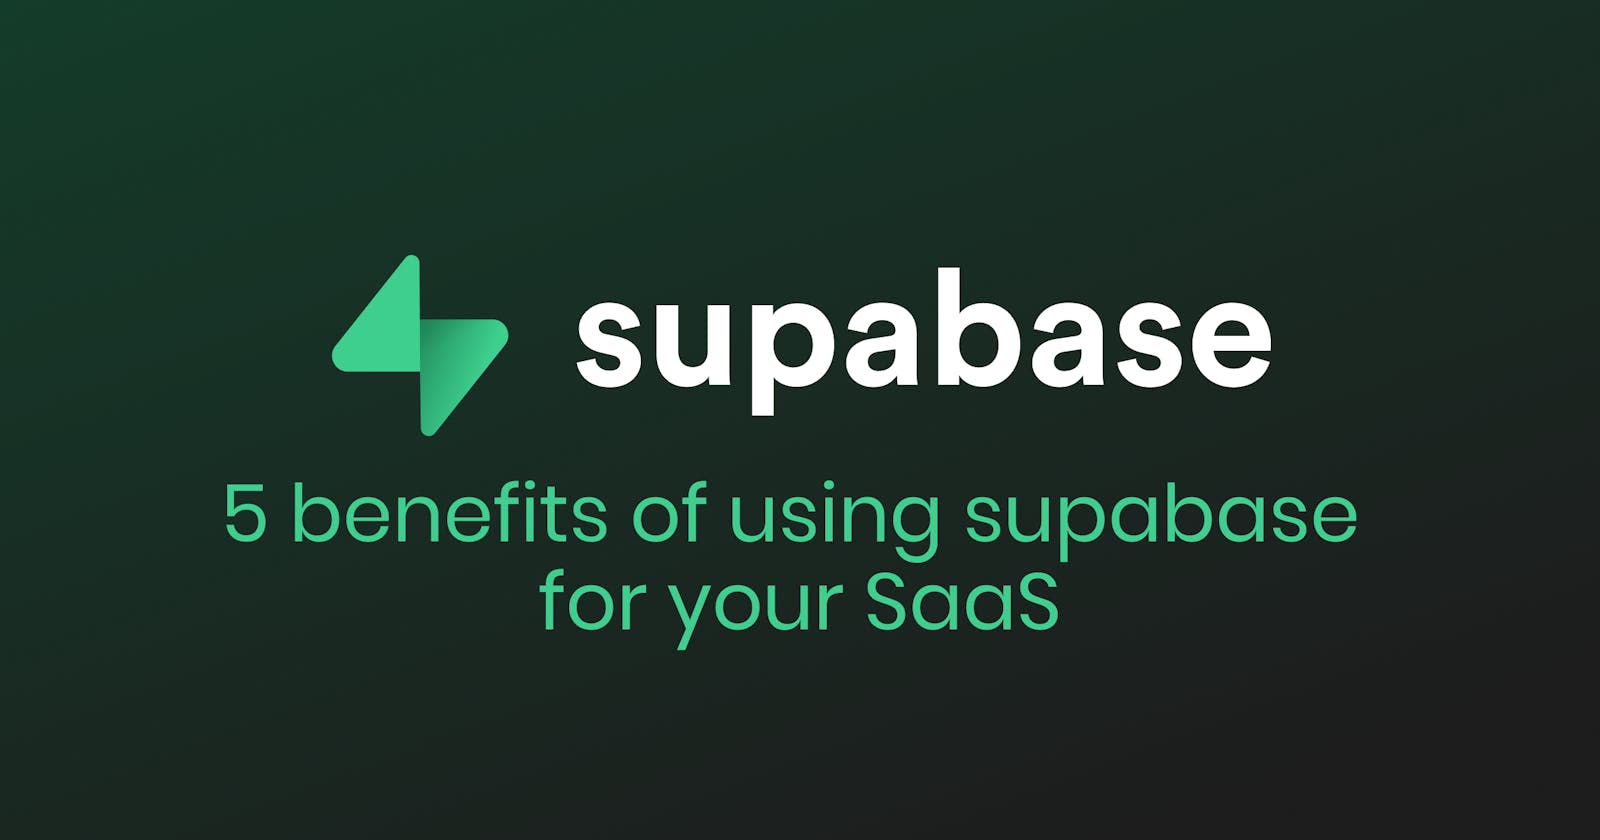 5 benefits of using Supabase for your SaaS